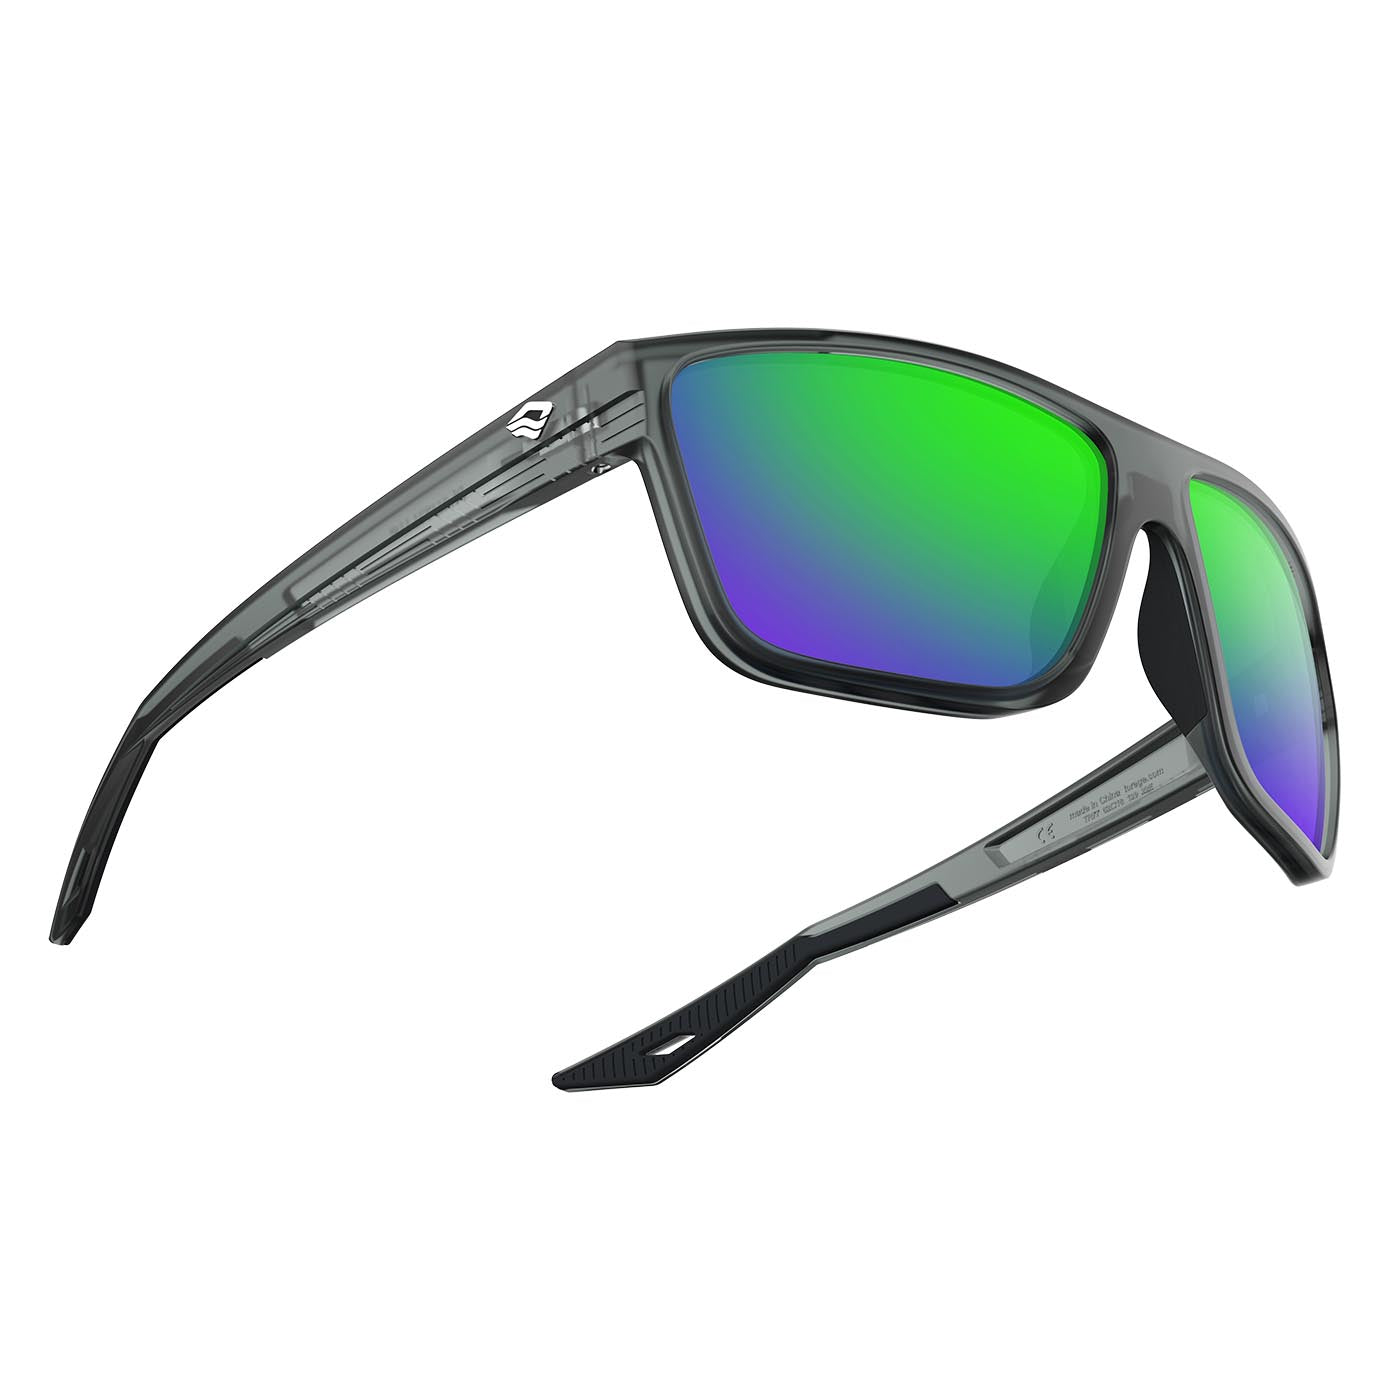 Emerald Smog Polarized Sports Sunglasses for Men & Women - Lifetime Warranty - Ideal for Men & Women in Fishing, Boating, Beach, Mountaineering, and